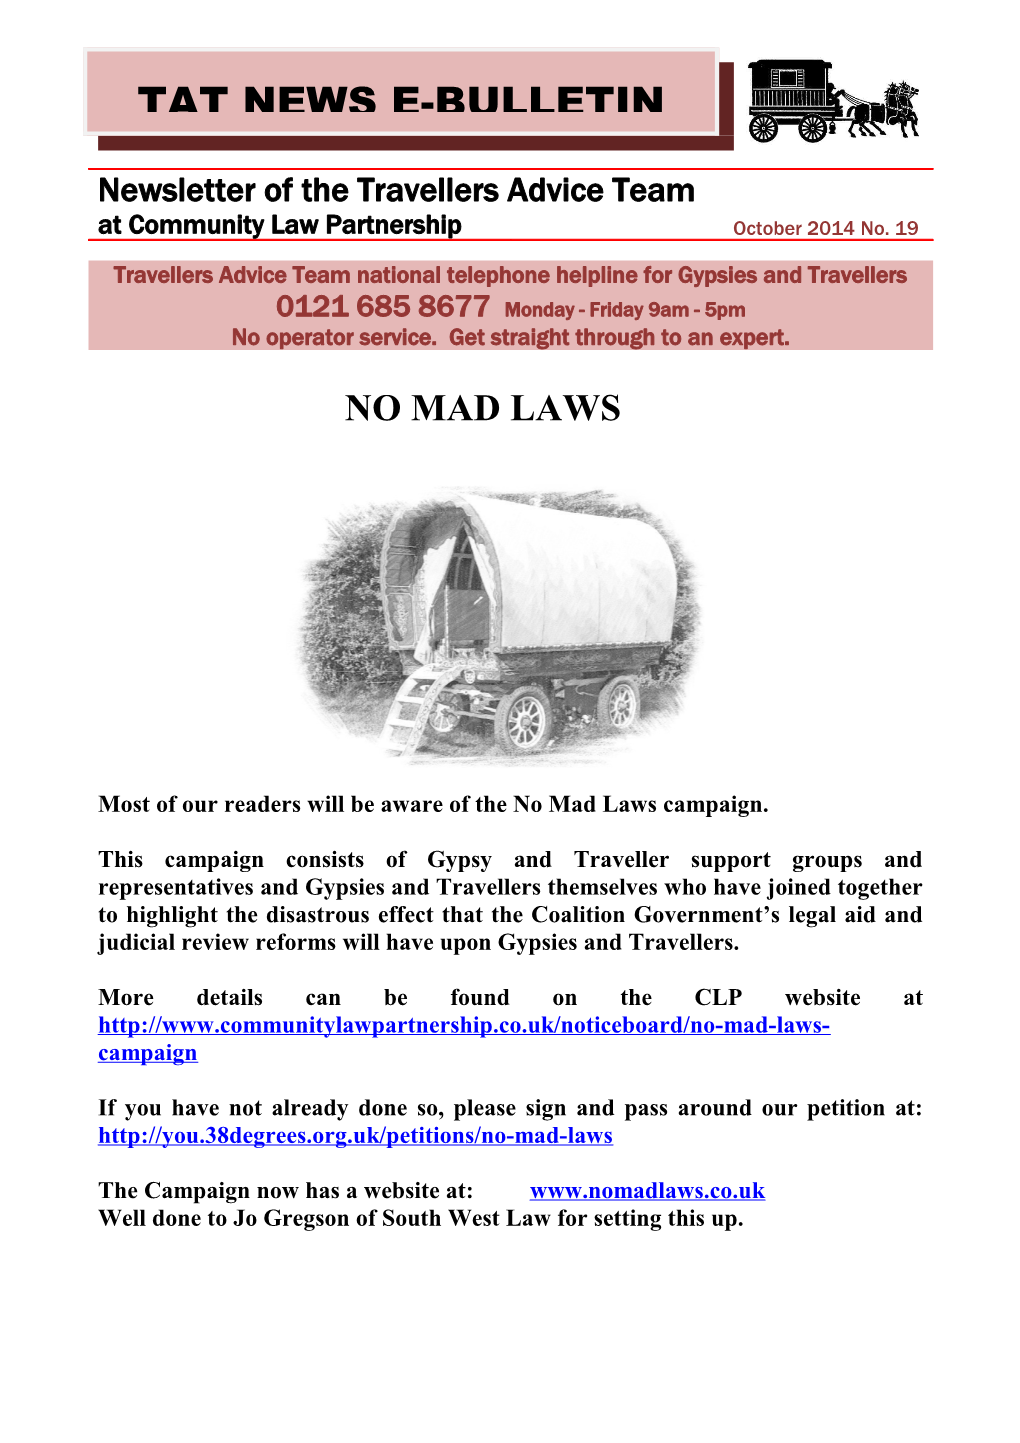 Most of Our Readers Will Be Aware of the No Mad Laws Campaign